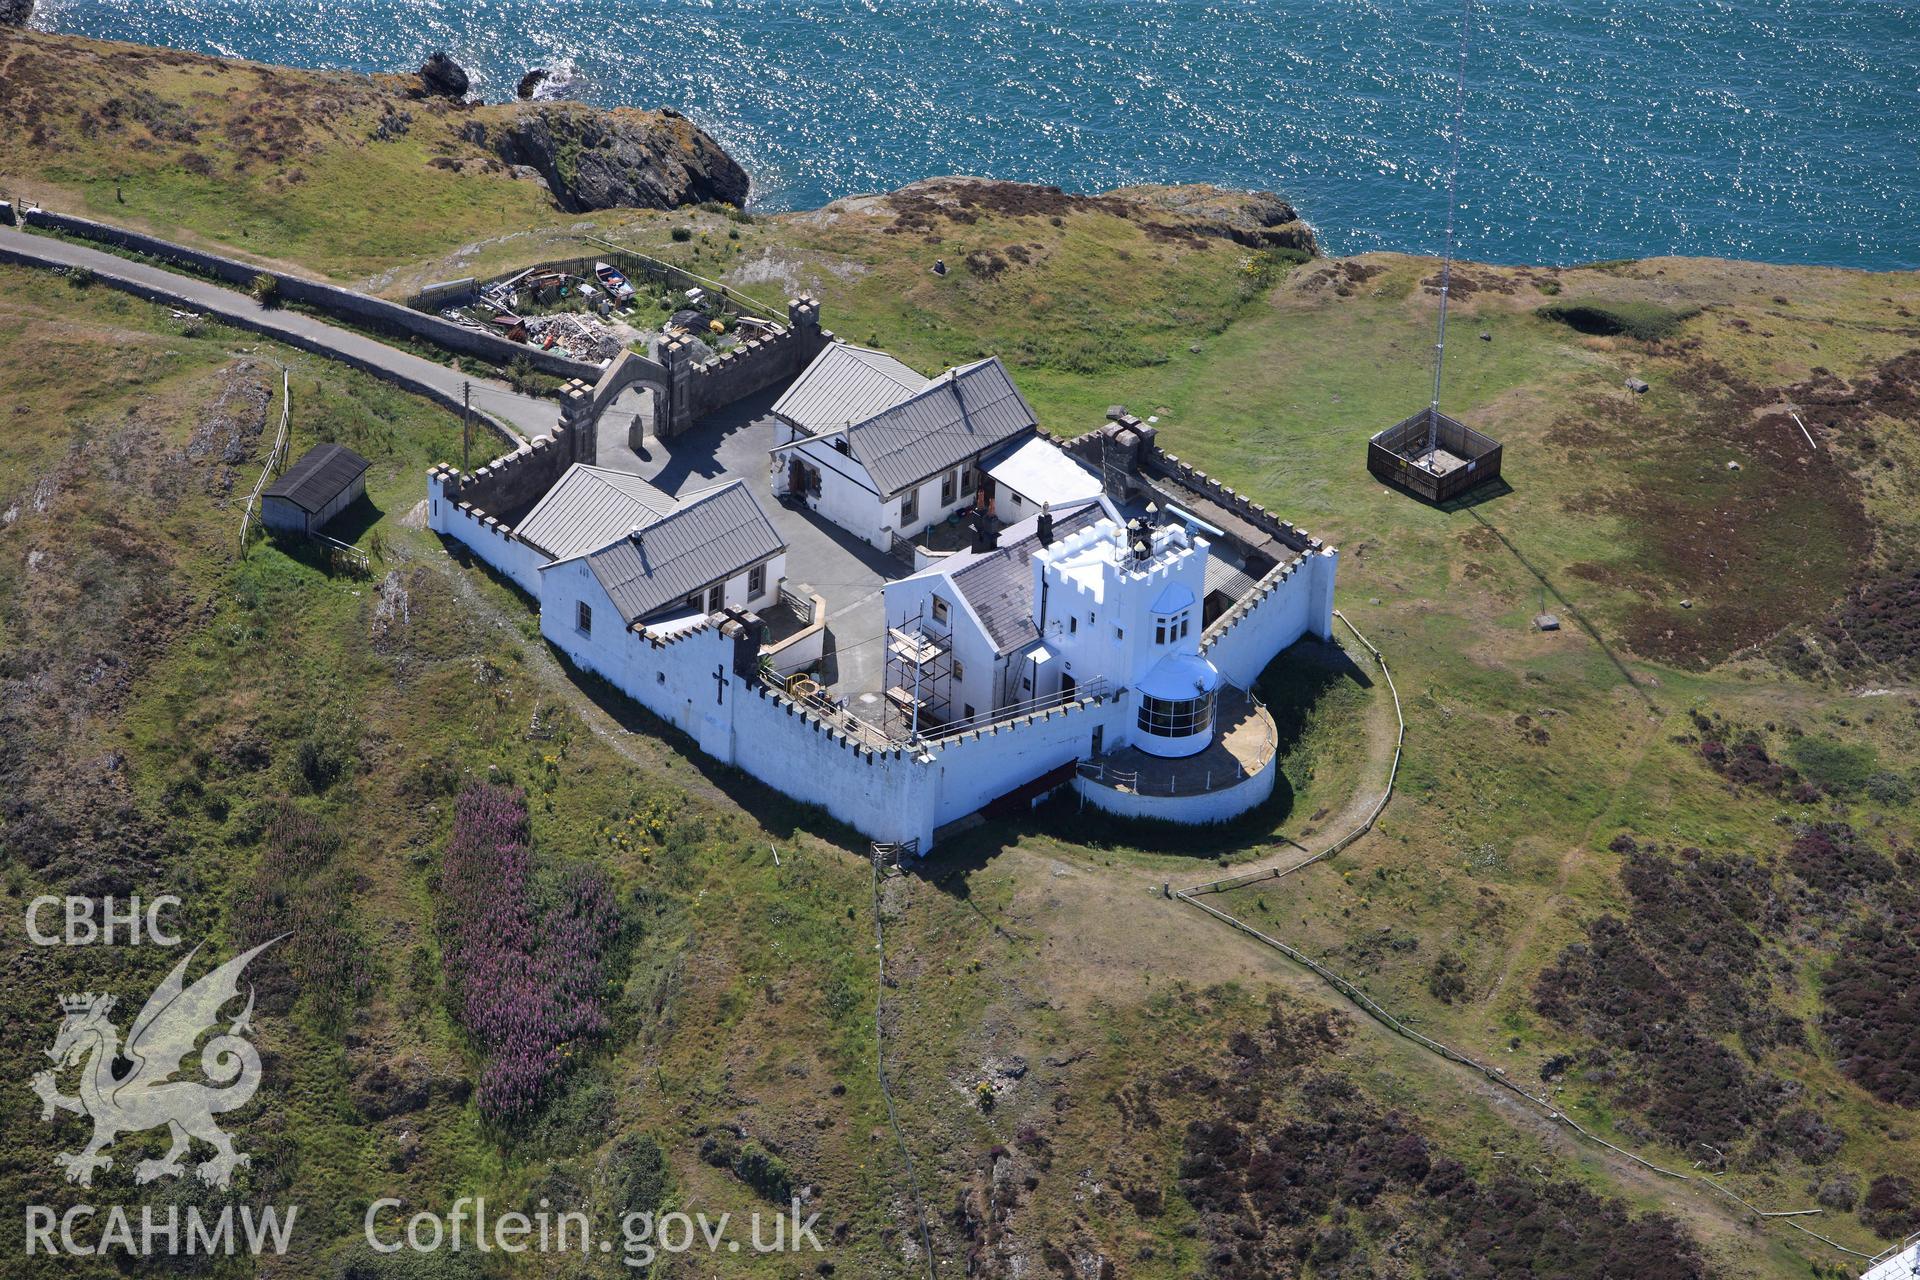 RCAHMW colour oblique photograph of Point Lynas Lighthouse. Taken by Toby Driver on 20/07/2011.